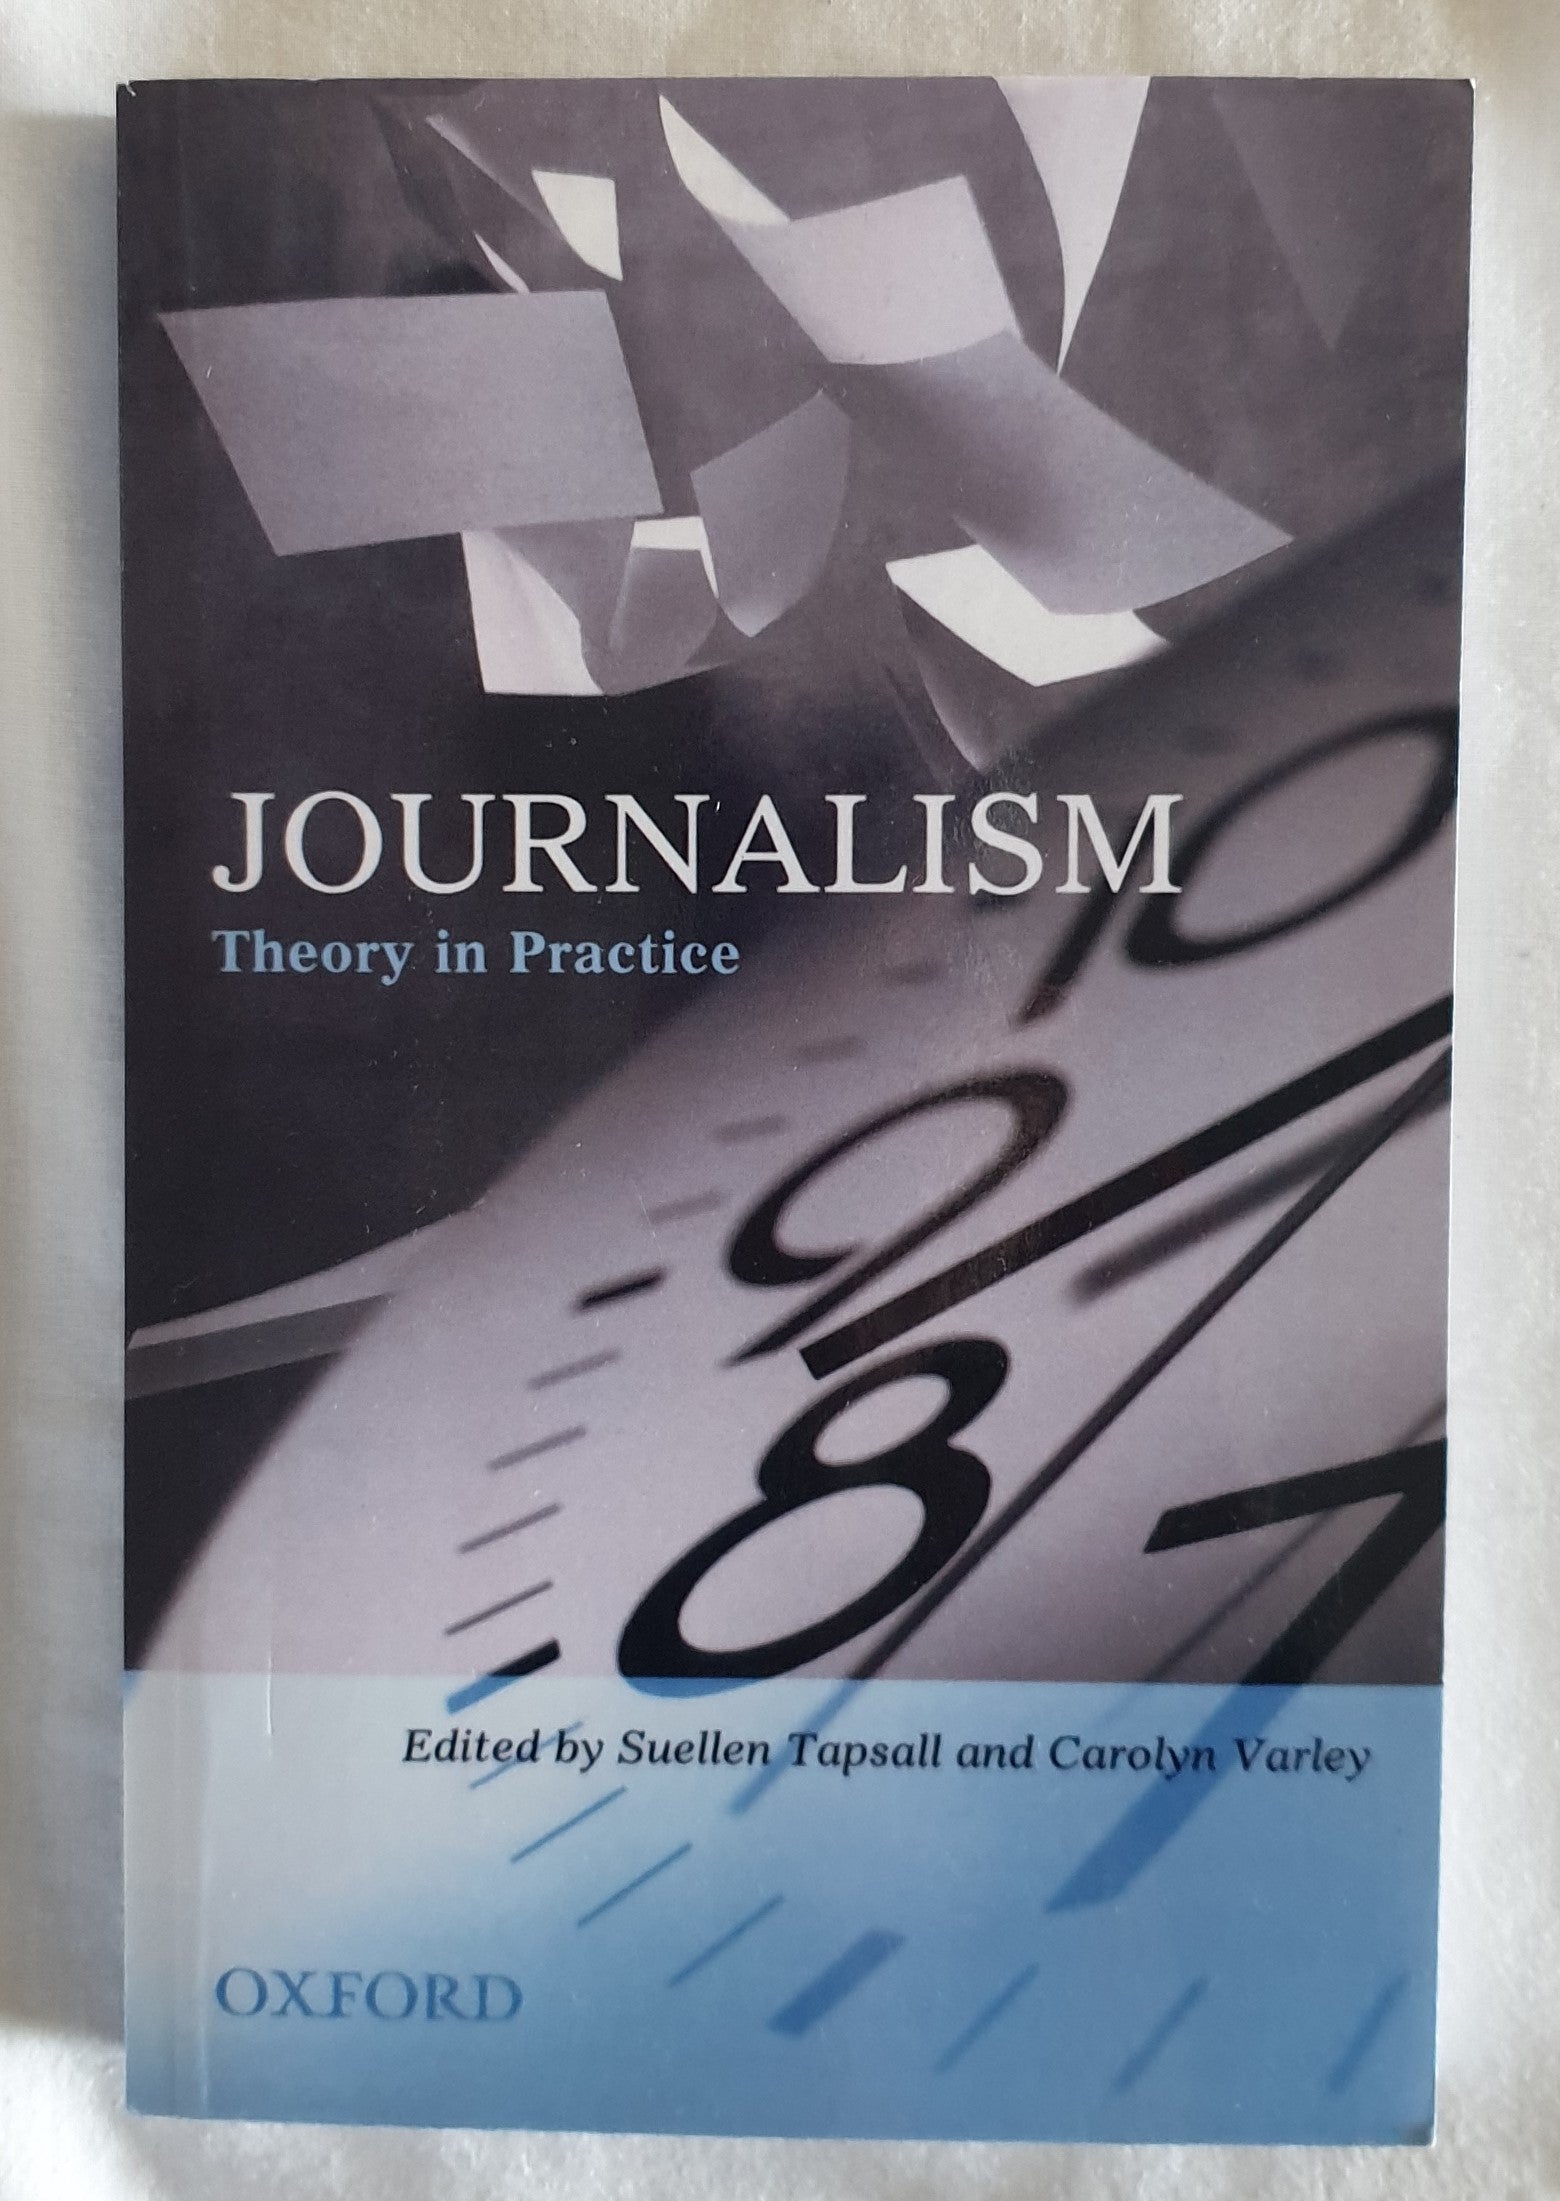 Journalism  Theory in Practice  Edited by Suellen Tapsall and Carolyn Varley